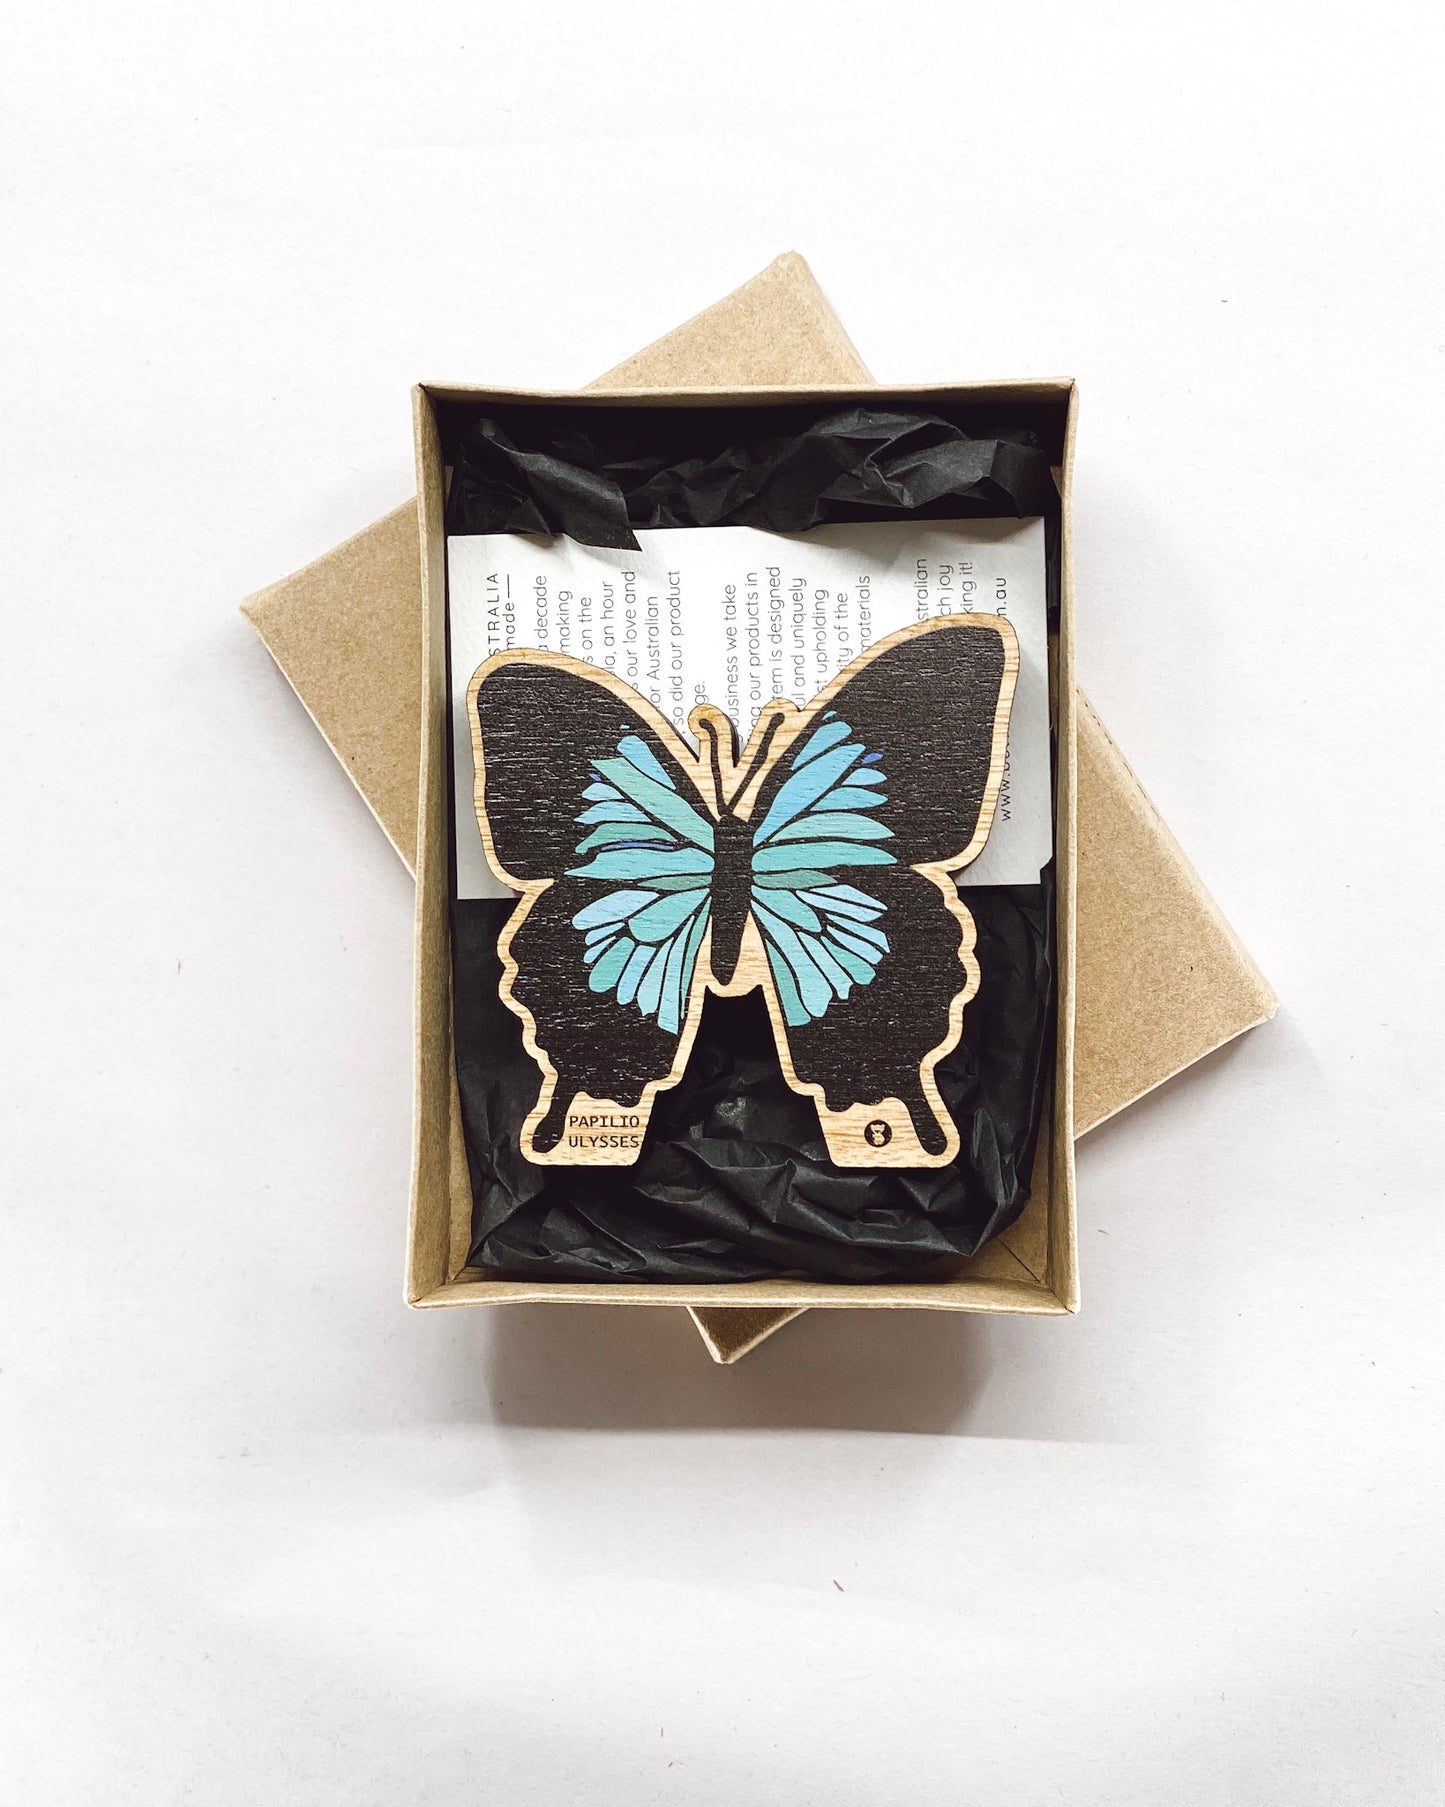 Figurine Butterfly Papilio Ulysses